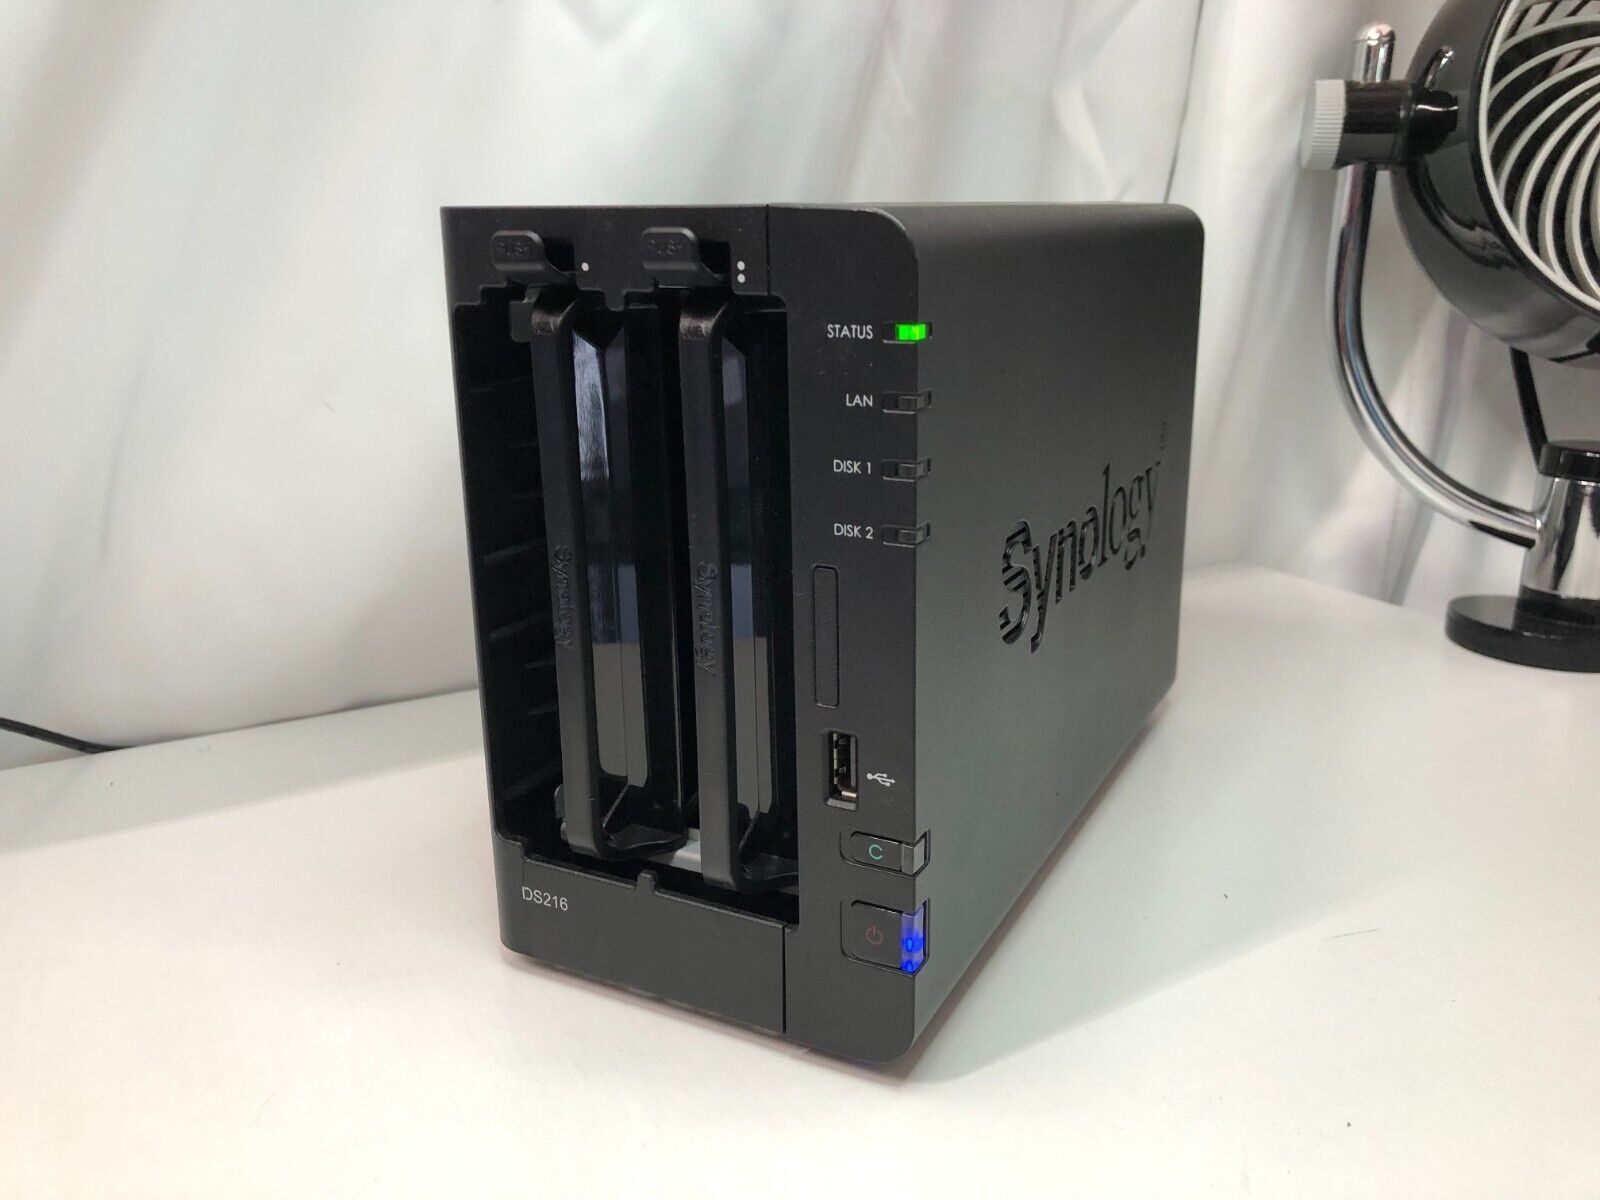 Synology DiskStation DS216 2-Bays NAS Network Attached Storage *No HDDs* Tested